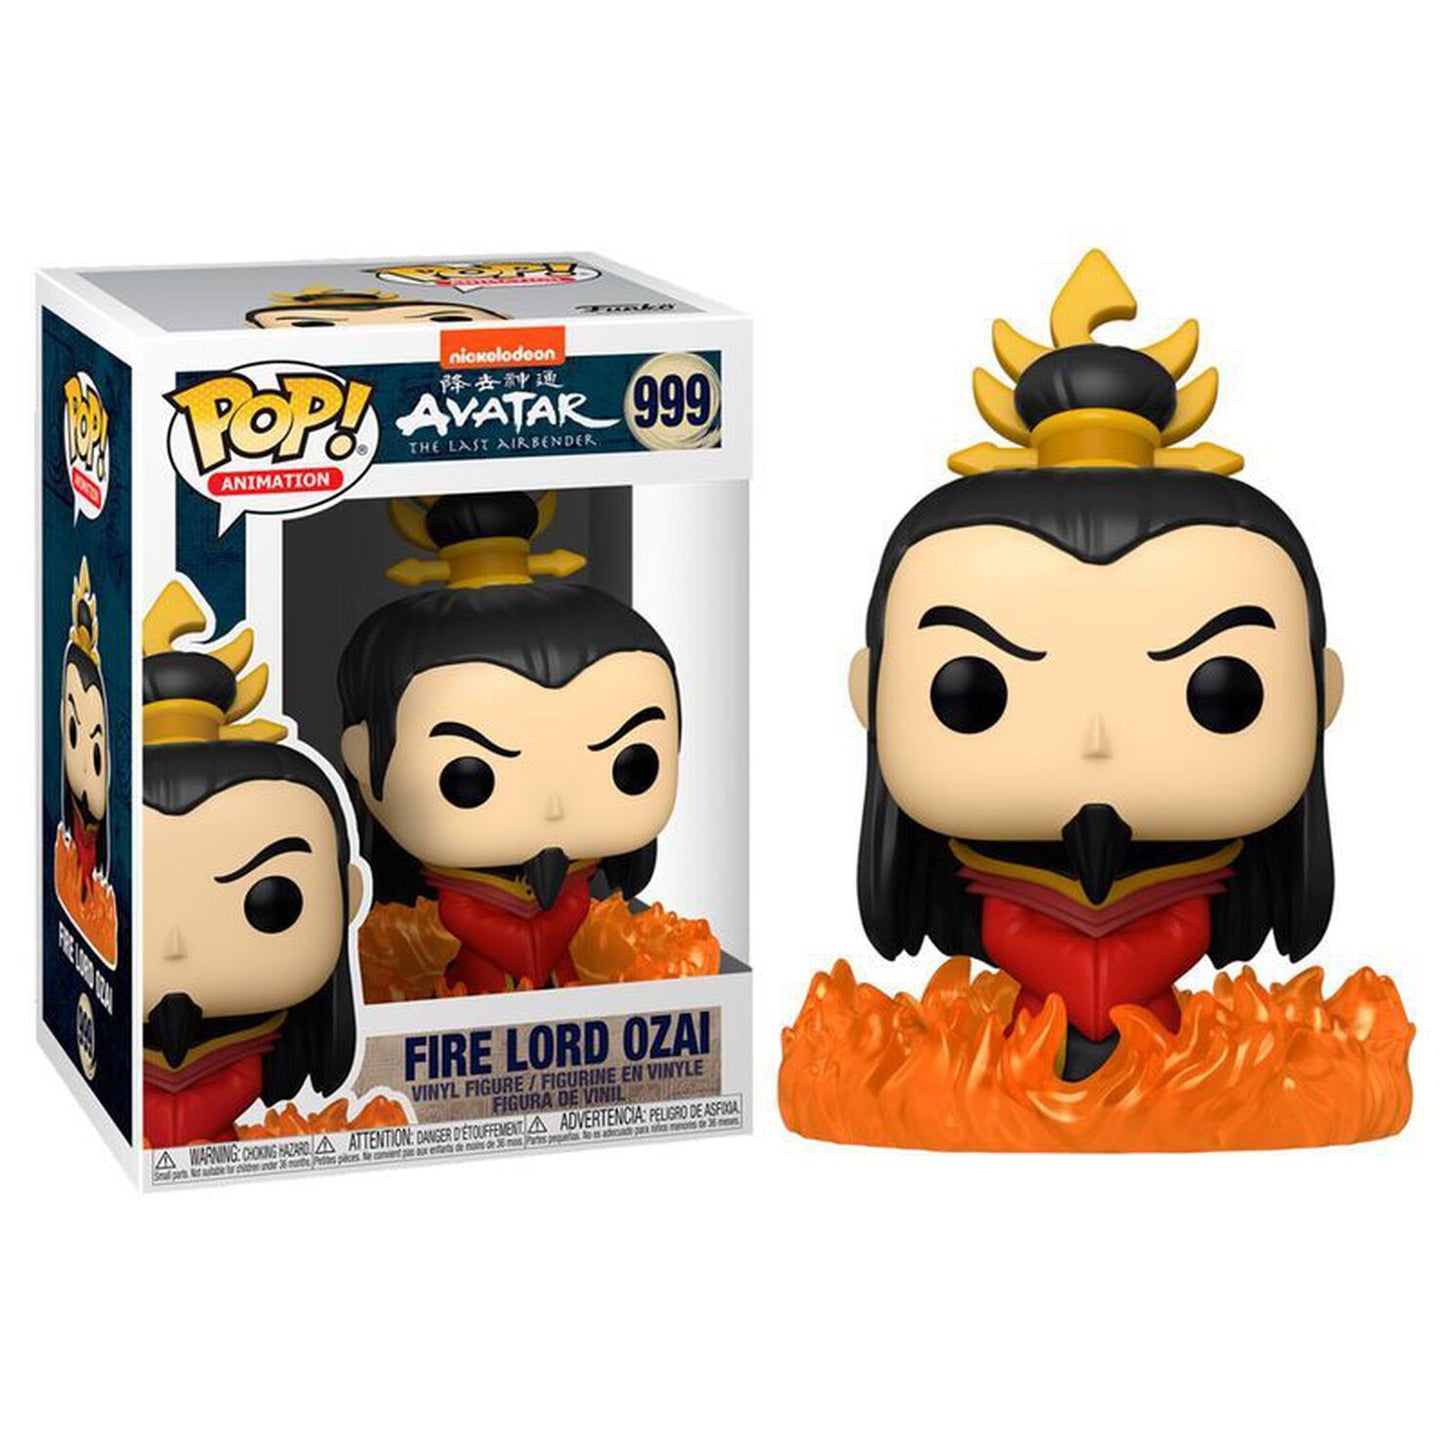 Funko POP! Animation - Avatar the last airbender - Fire lord ozai #999 + PROTECTOR!